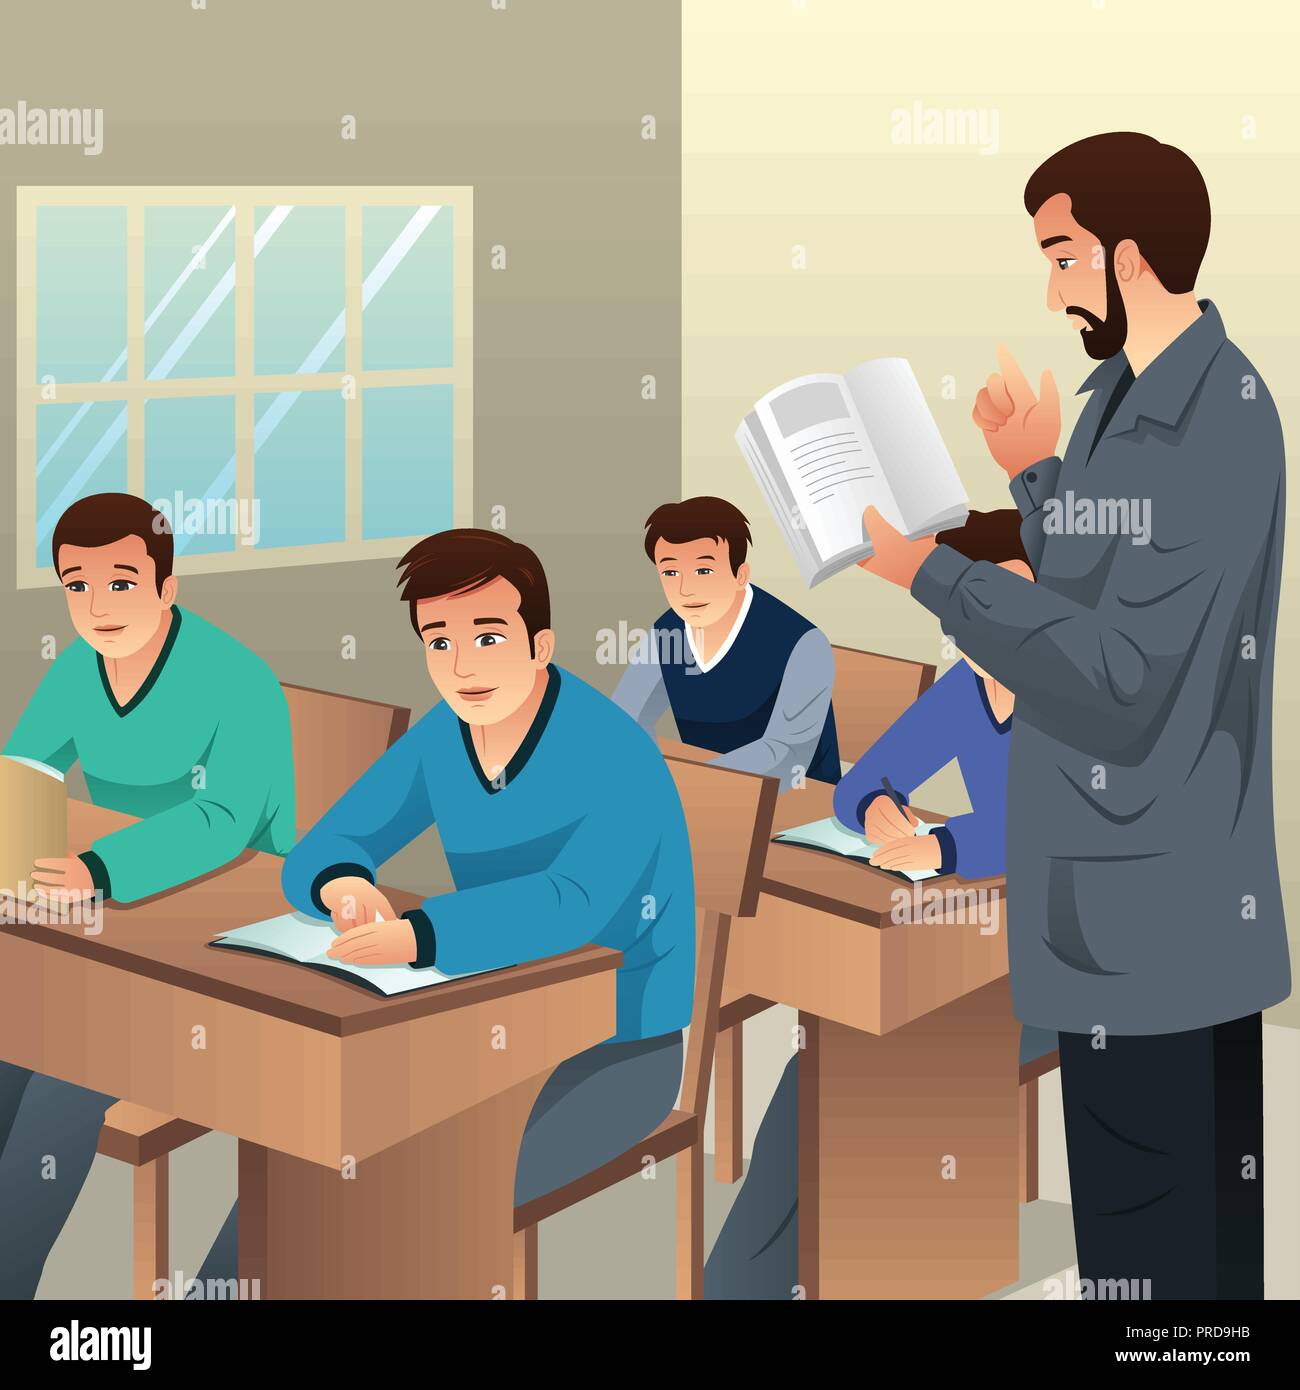 A Vector Illustration Of College Students In Classroom Stock Vector Image Art Alamy